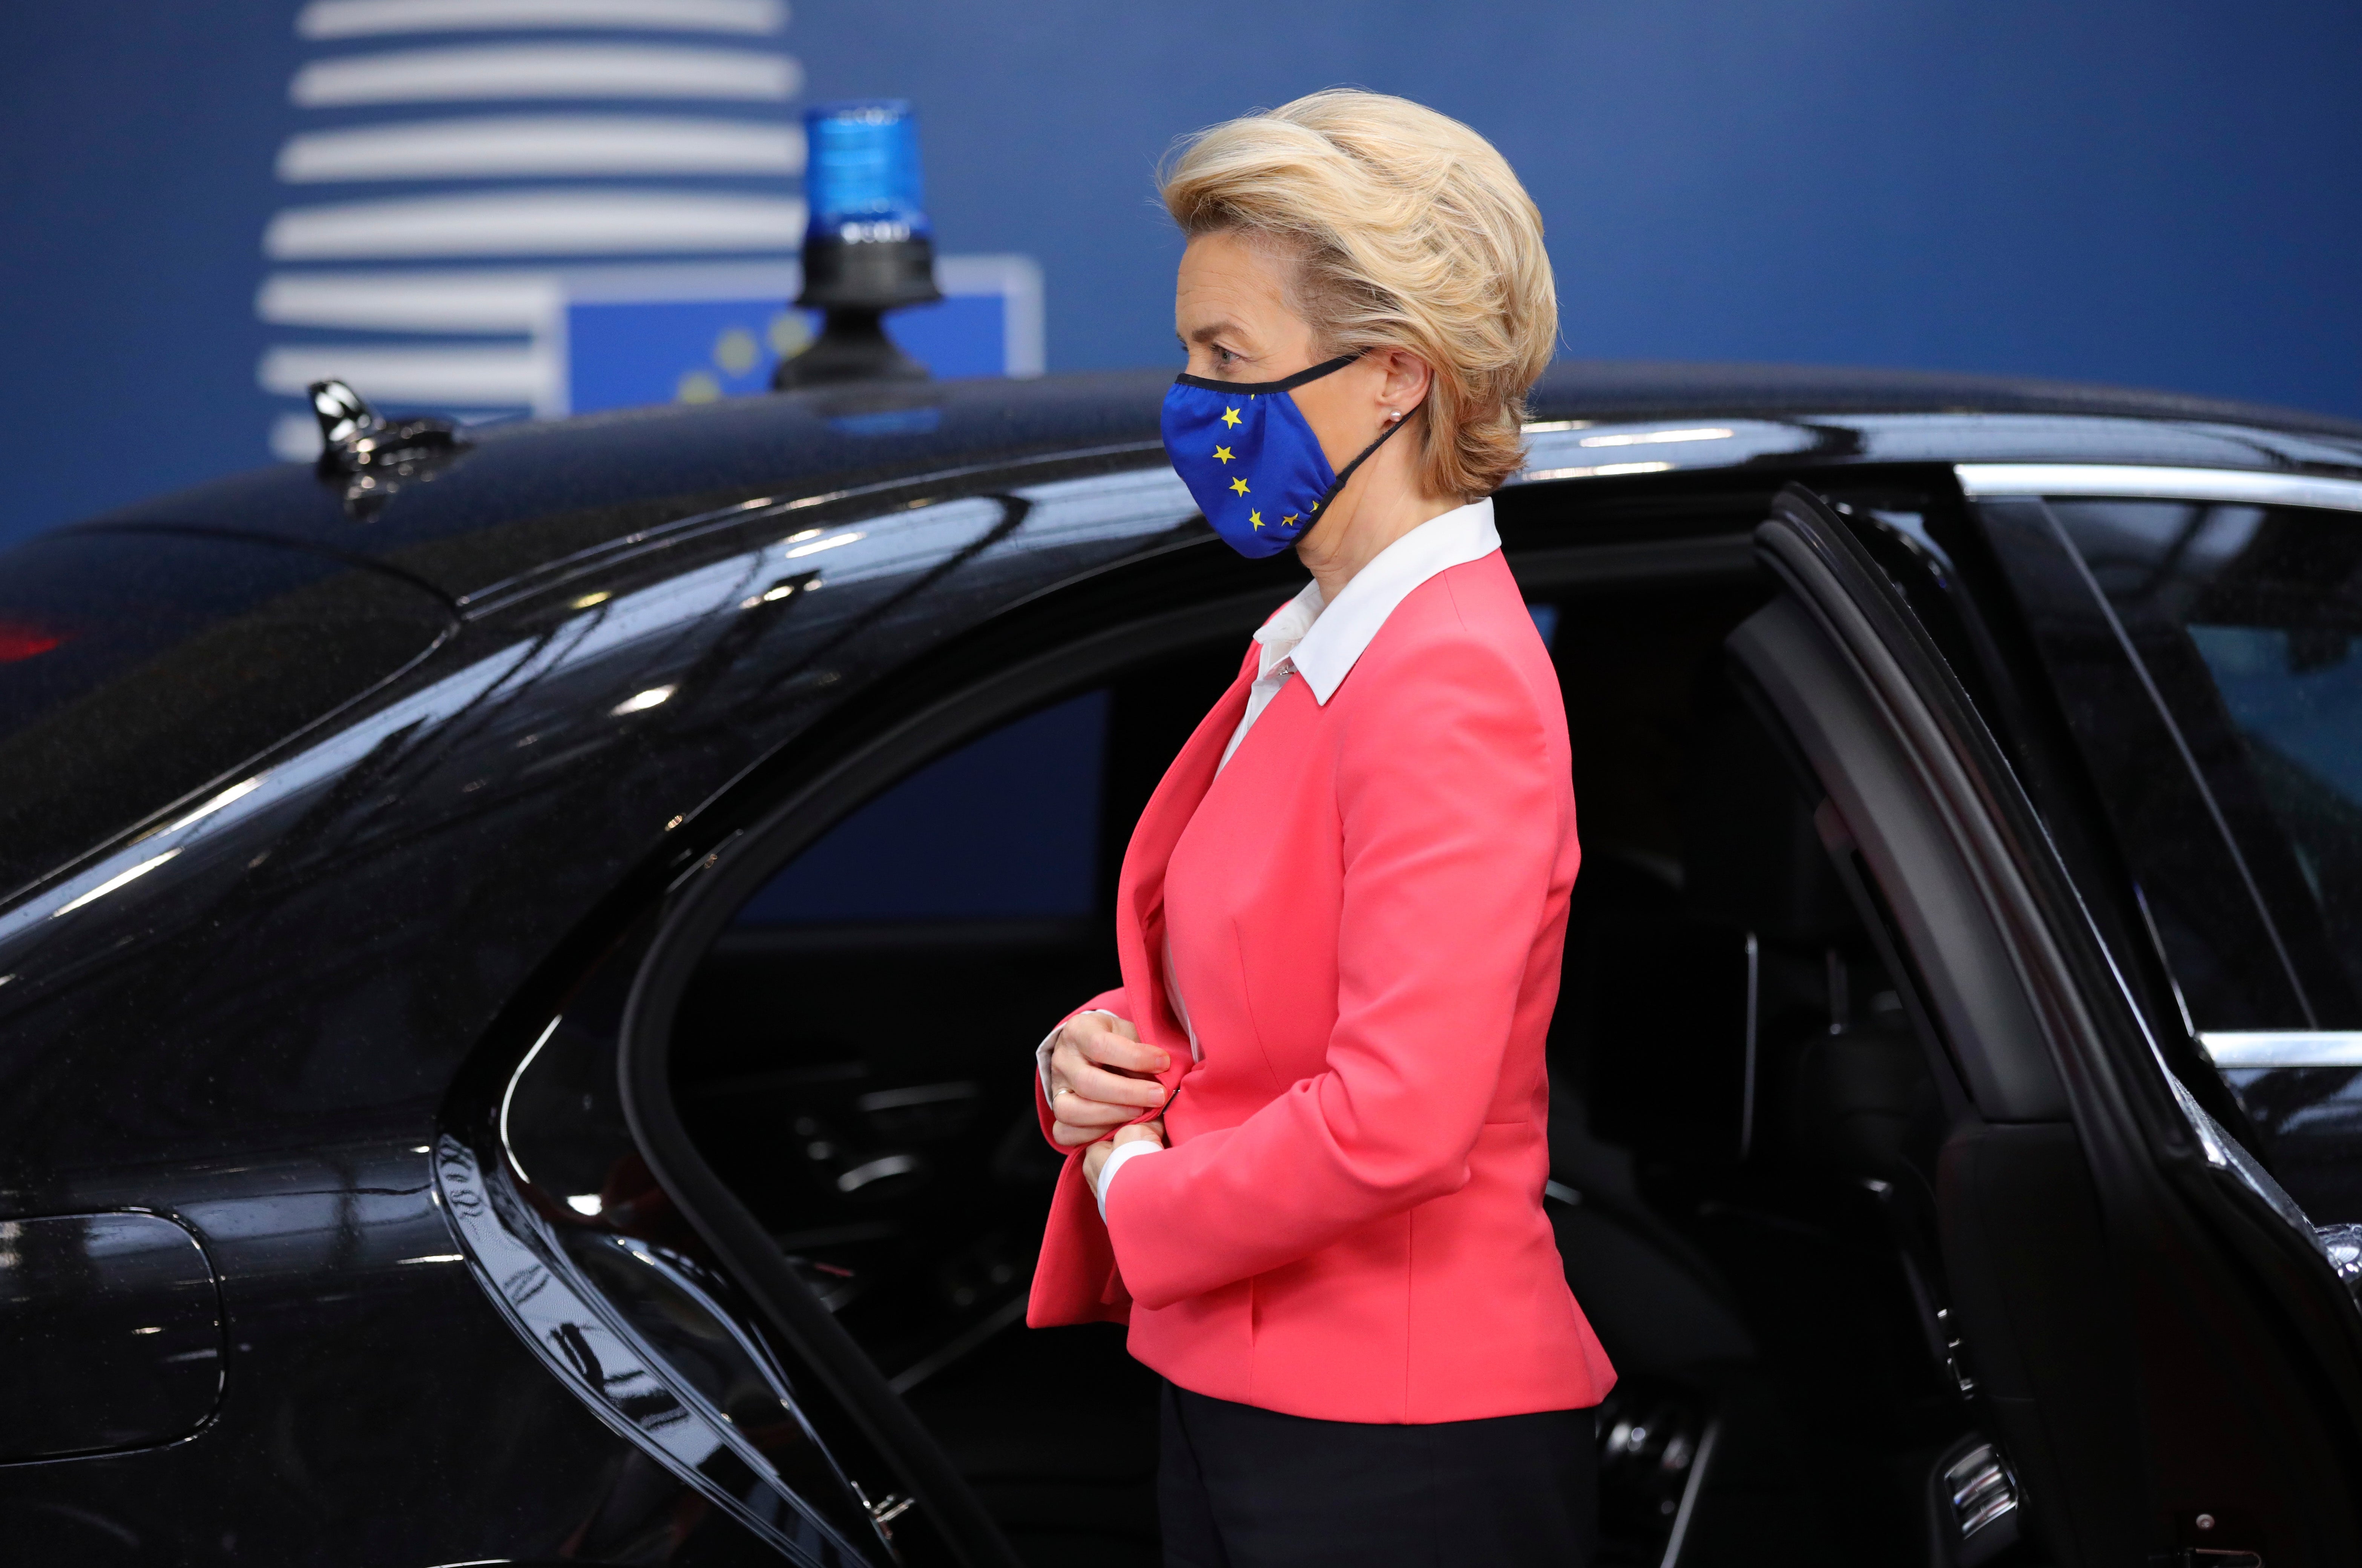 European Commission President Ursula von der Leyen steps out of a car as she arrives at an EU summit in Brussels (FILE)